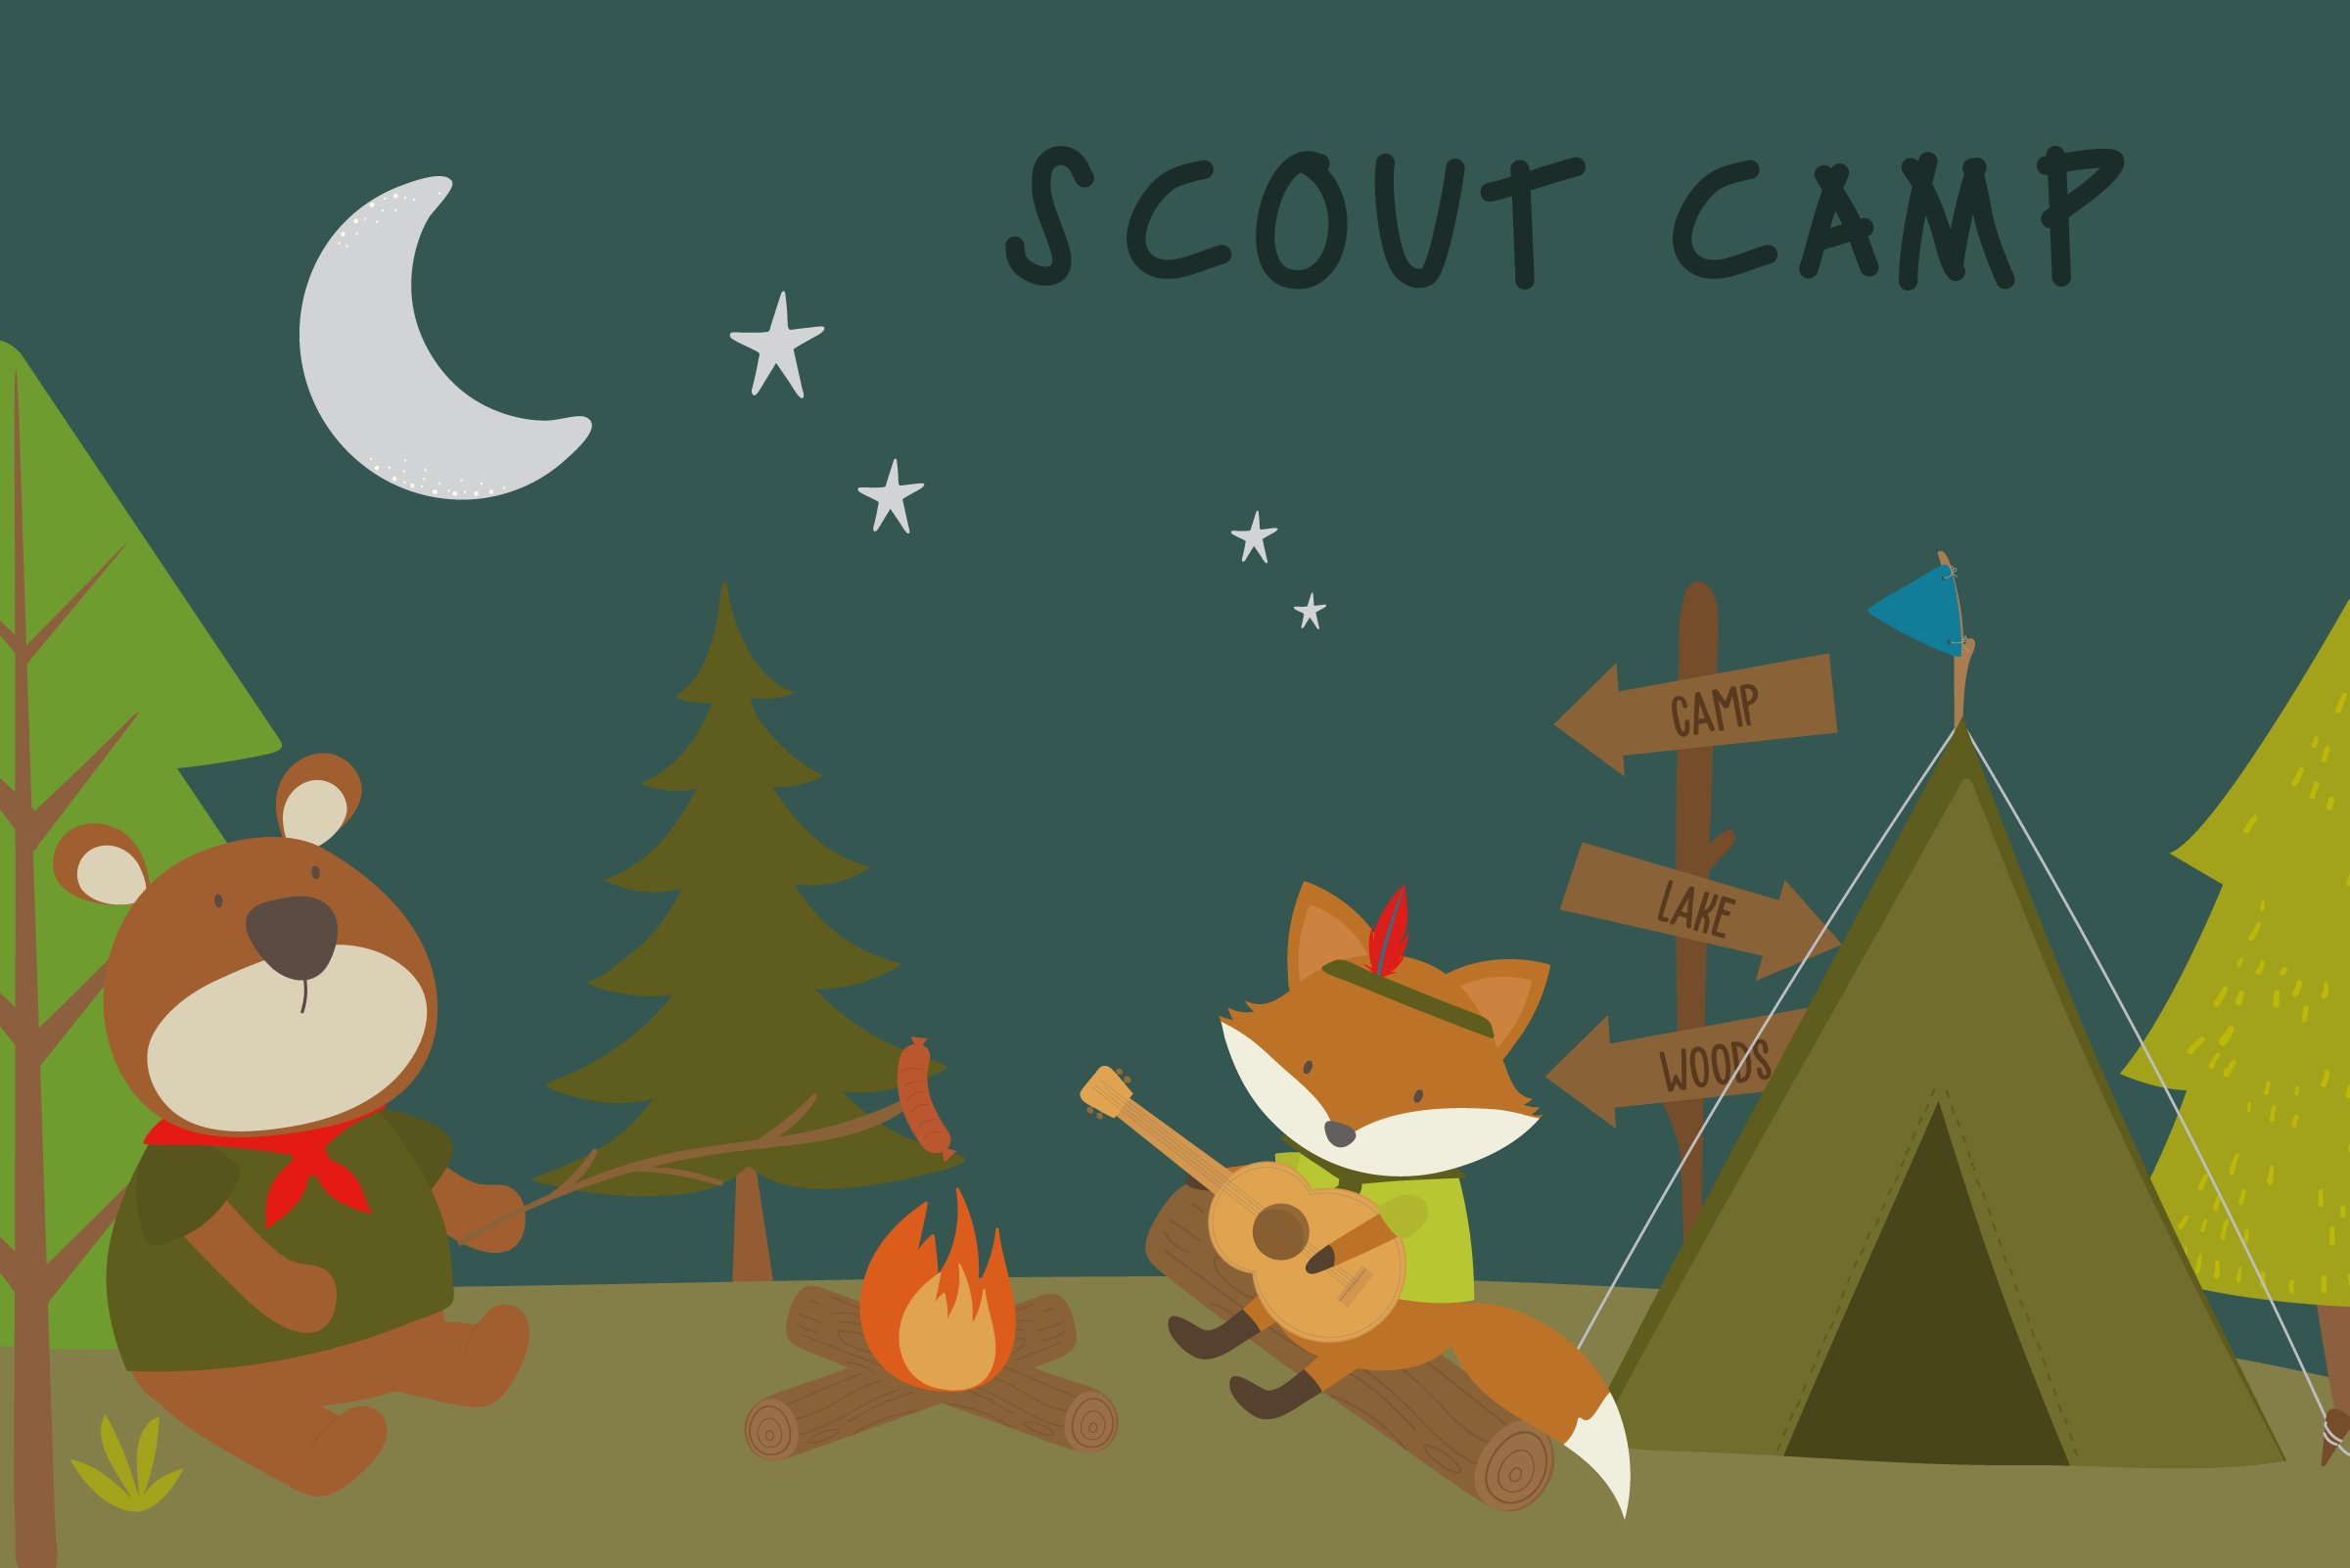 Scout Camp cover image.